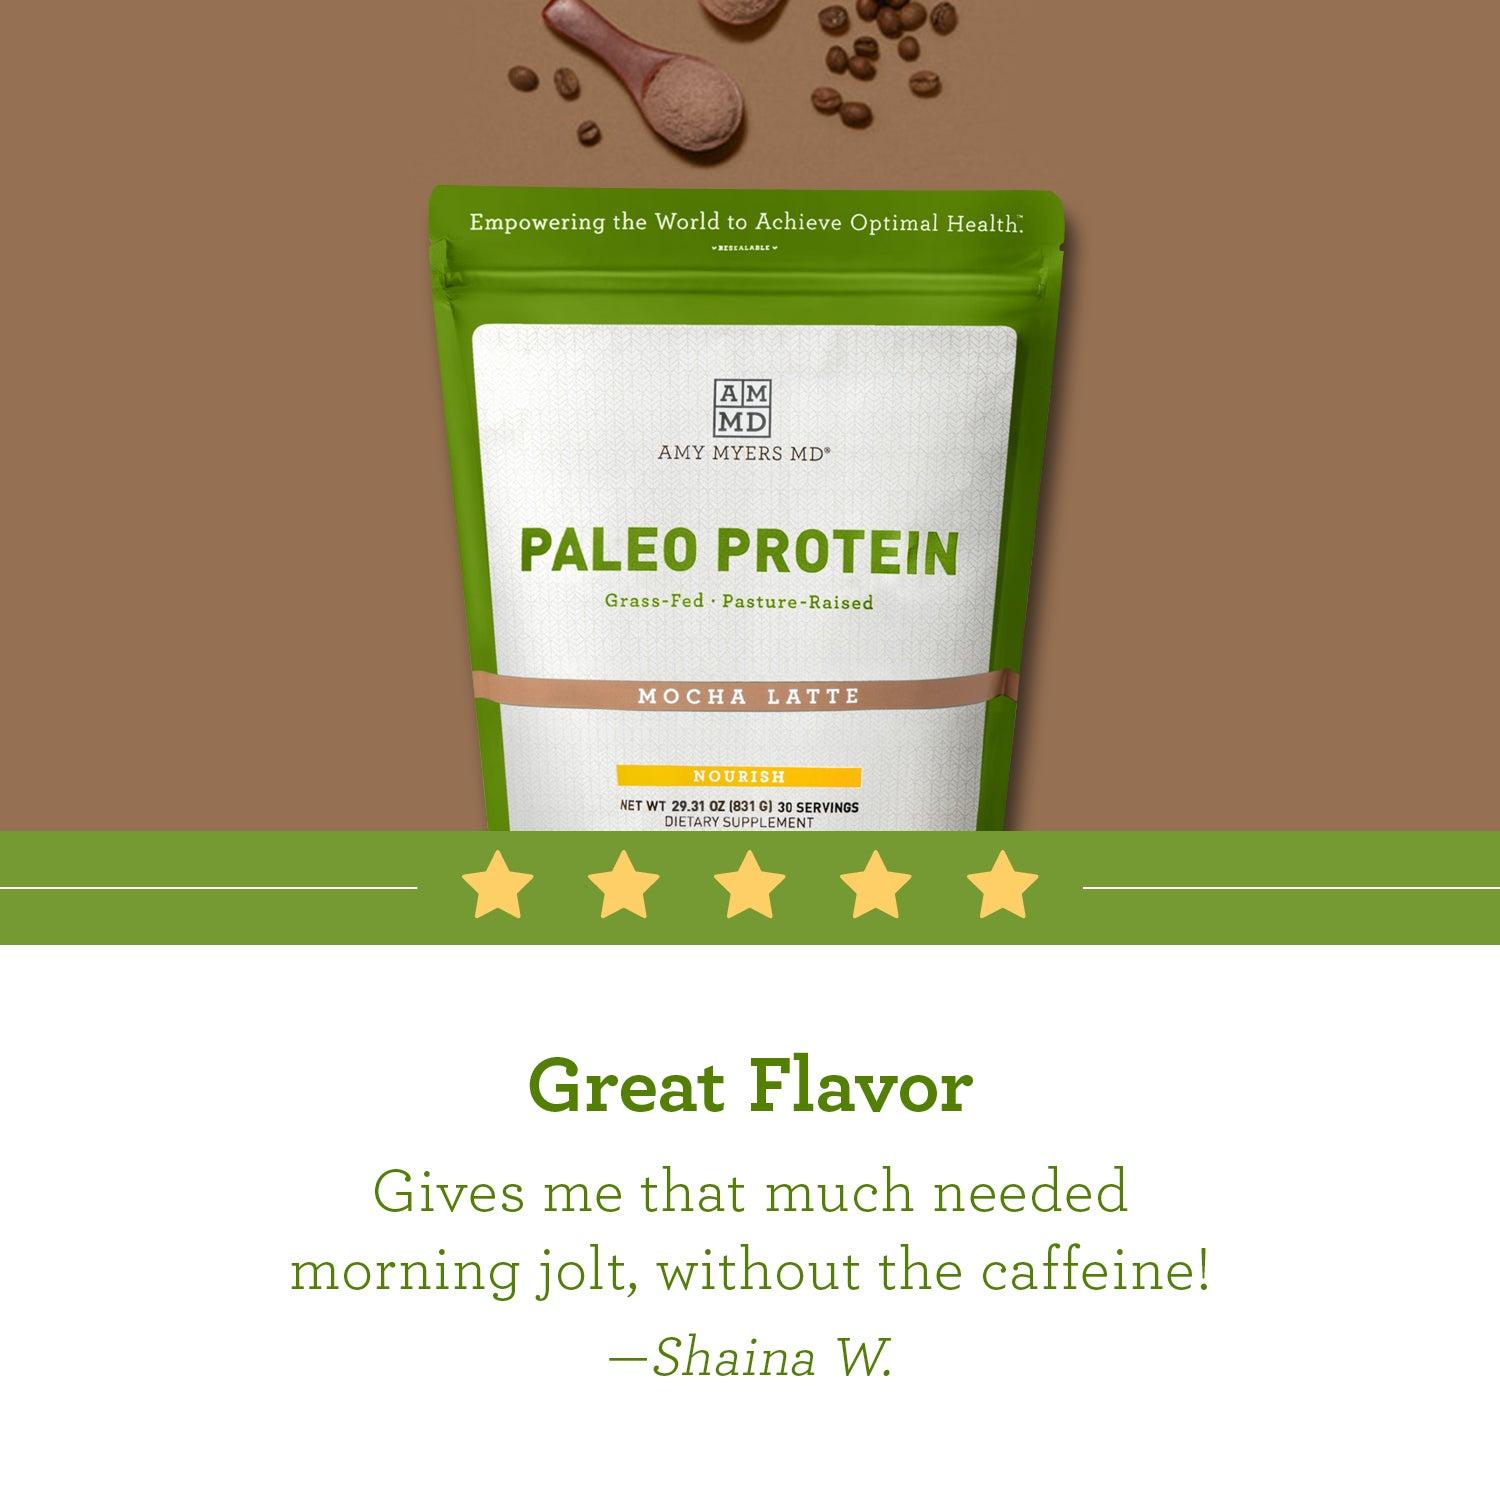 Customer review: "Great flavor. Gives me that much needed morning jolt, without the caffeine!" Shaina W.